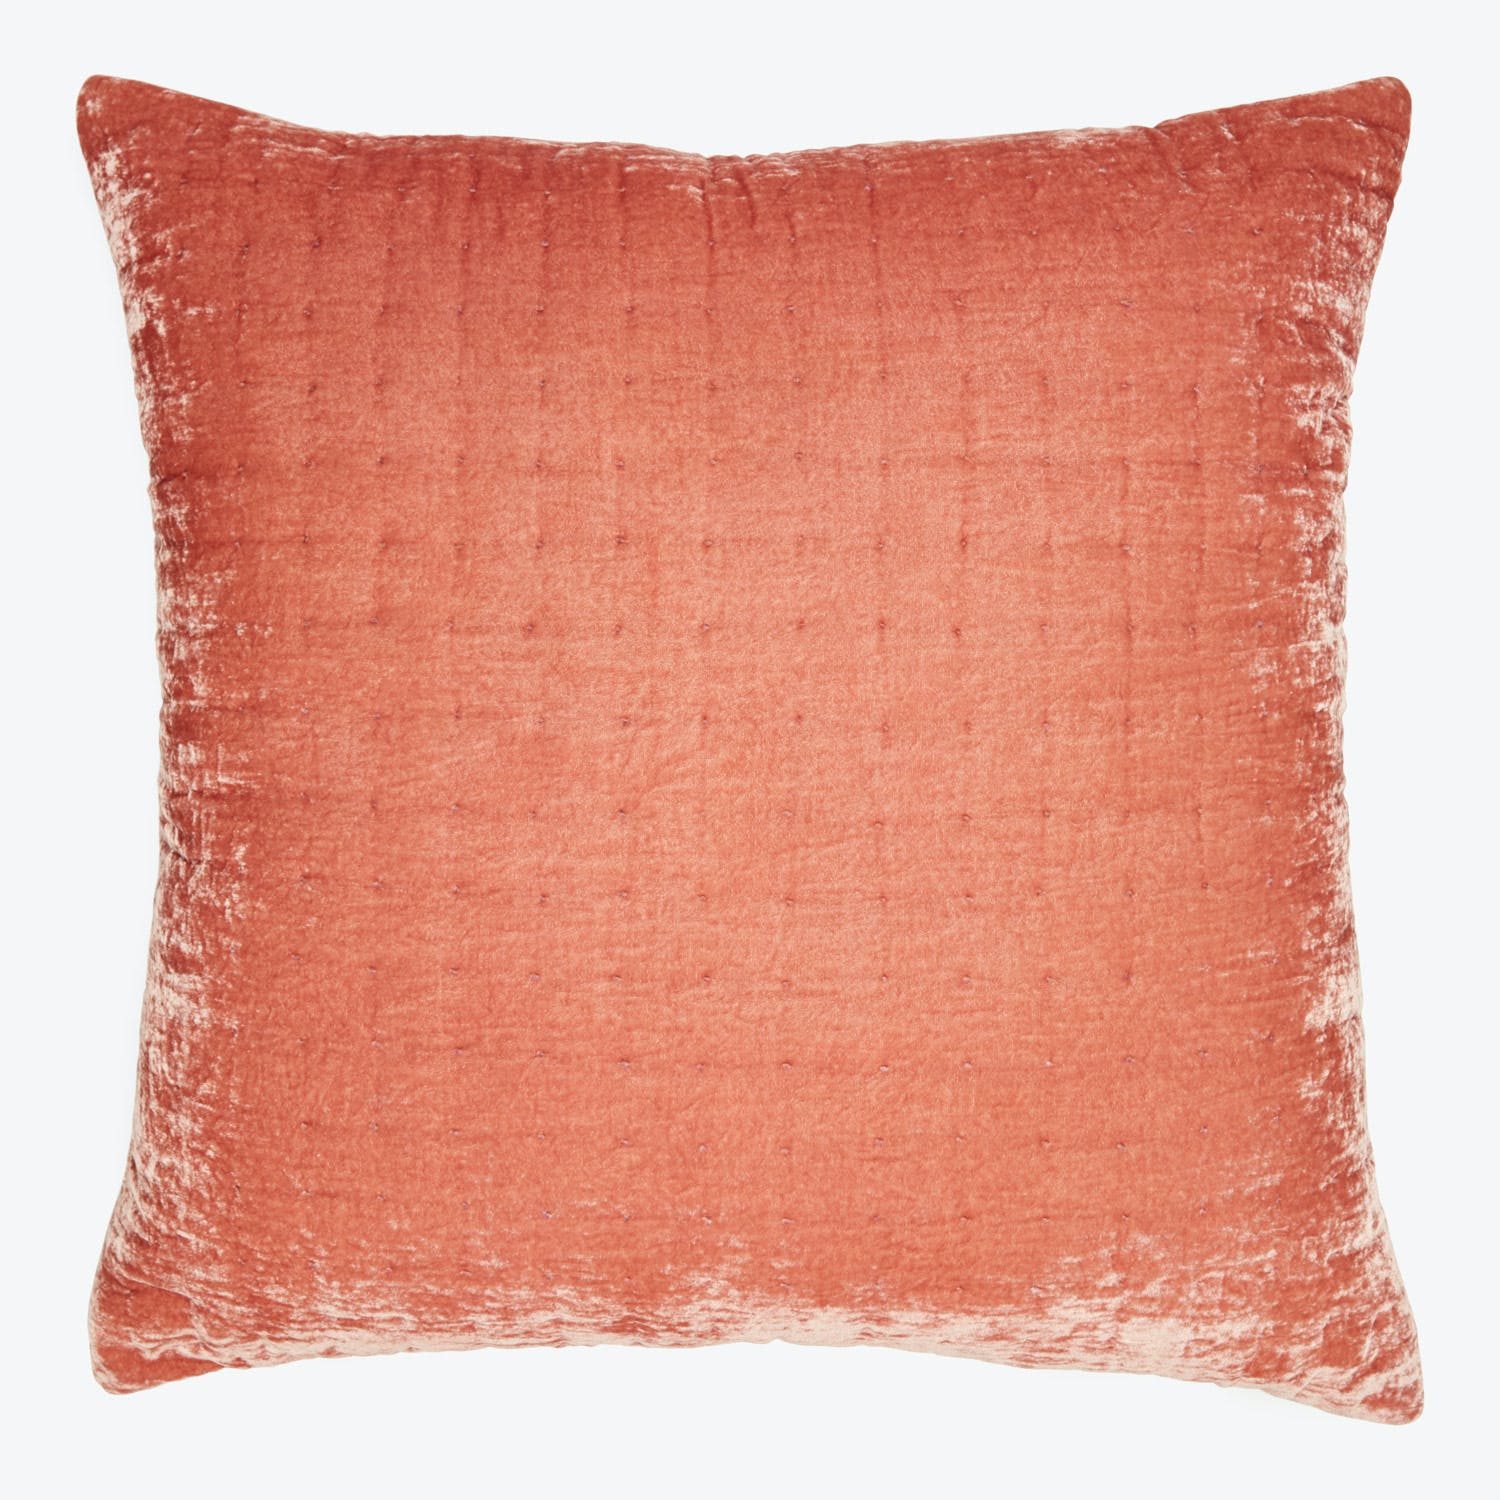 Vintage-style square cushion with textured surface in pink/coral color.